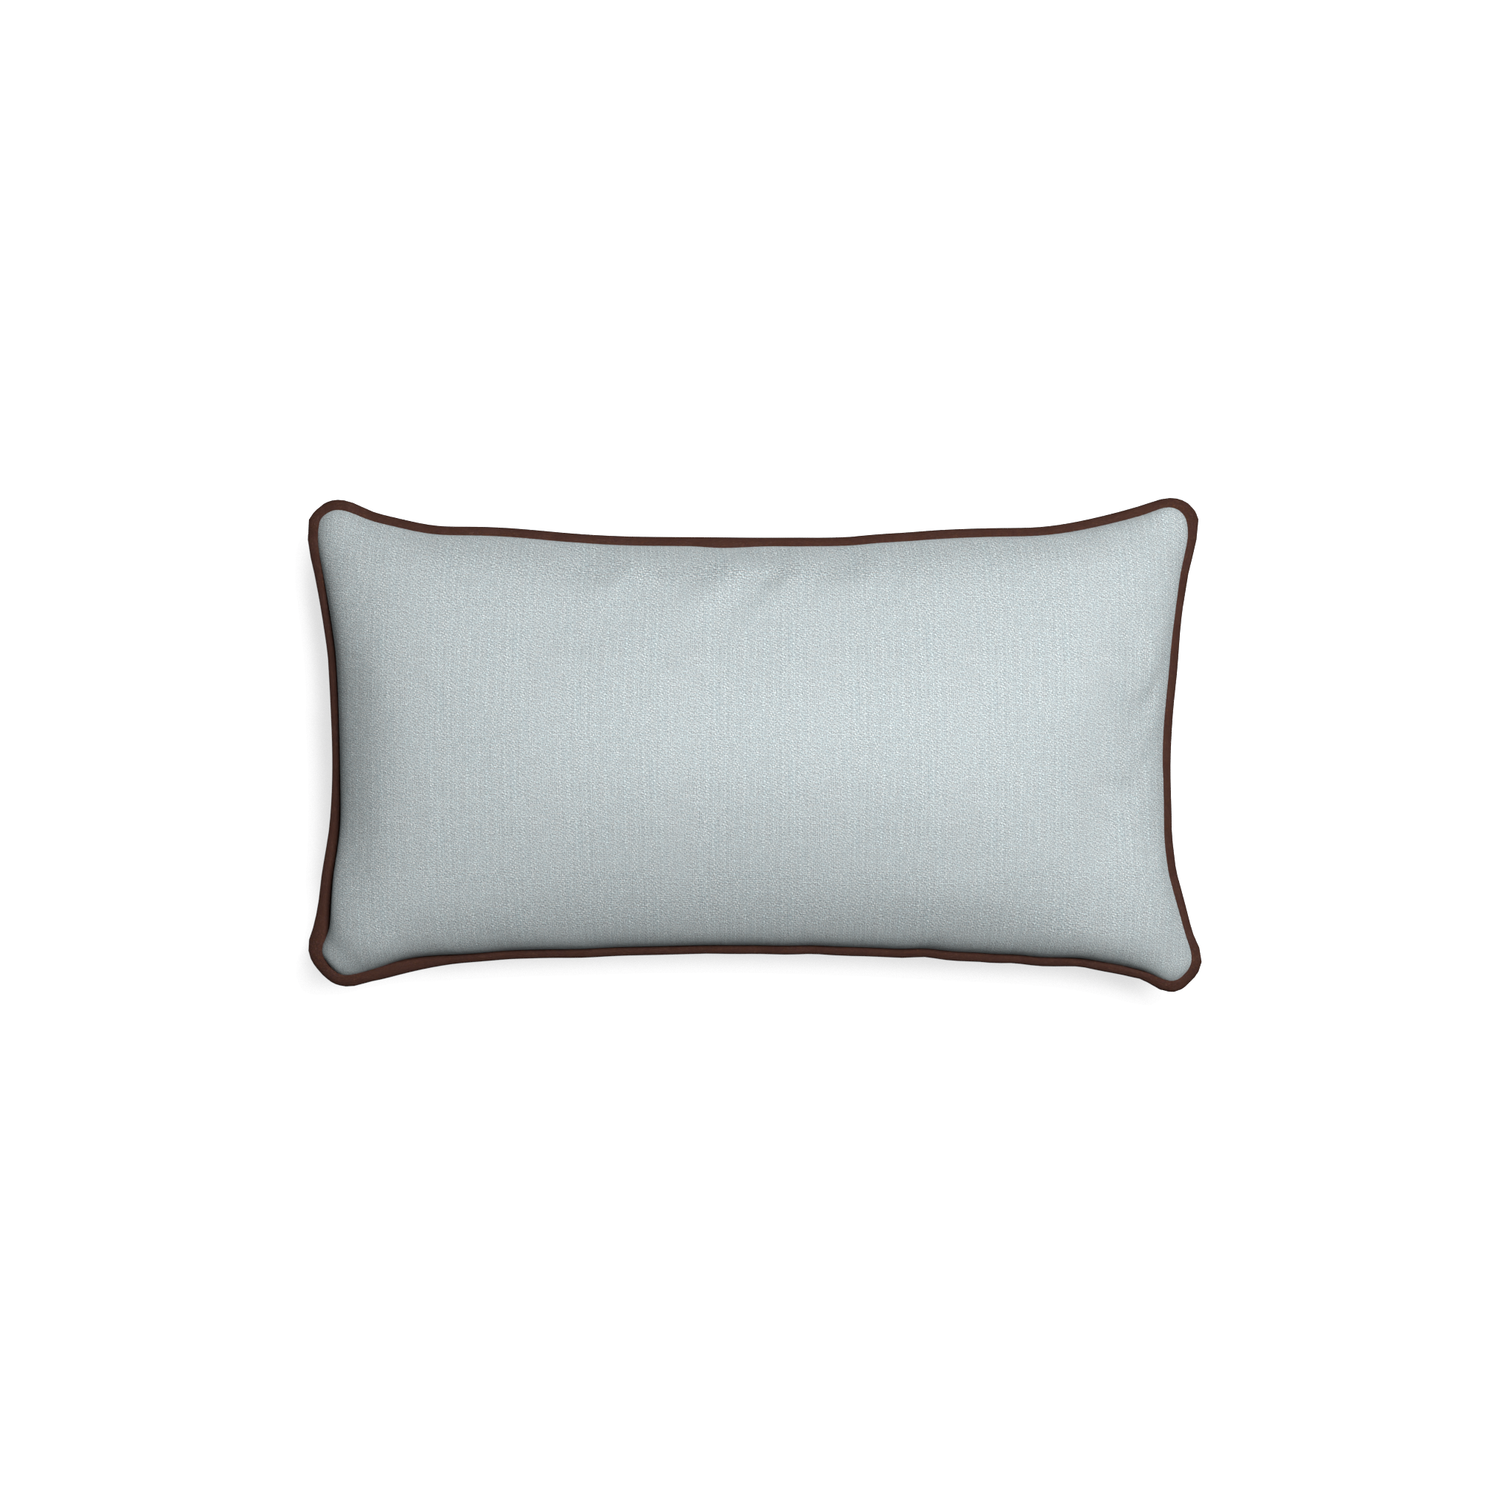 Petite-lumbar sea custom grey bluepillow with w piping on white background